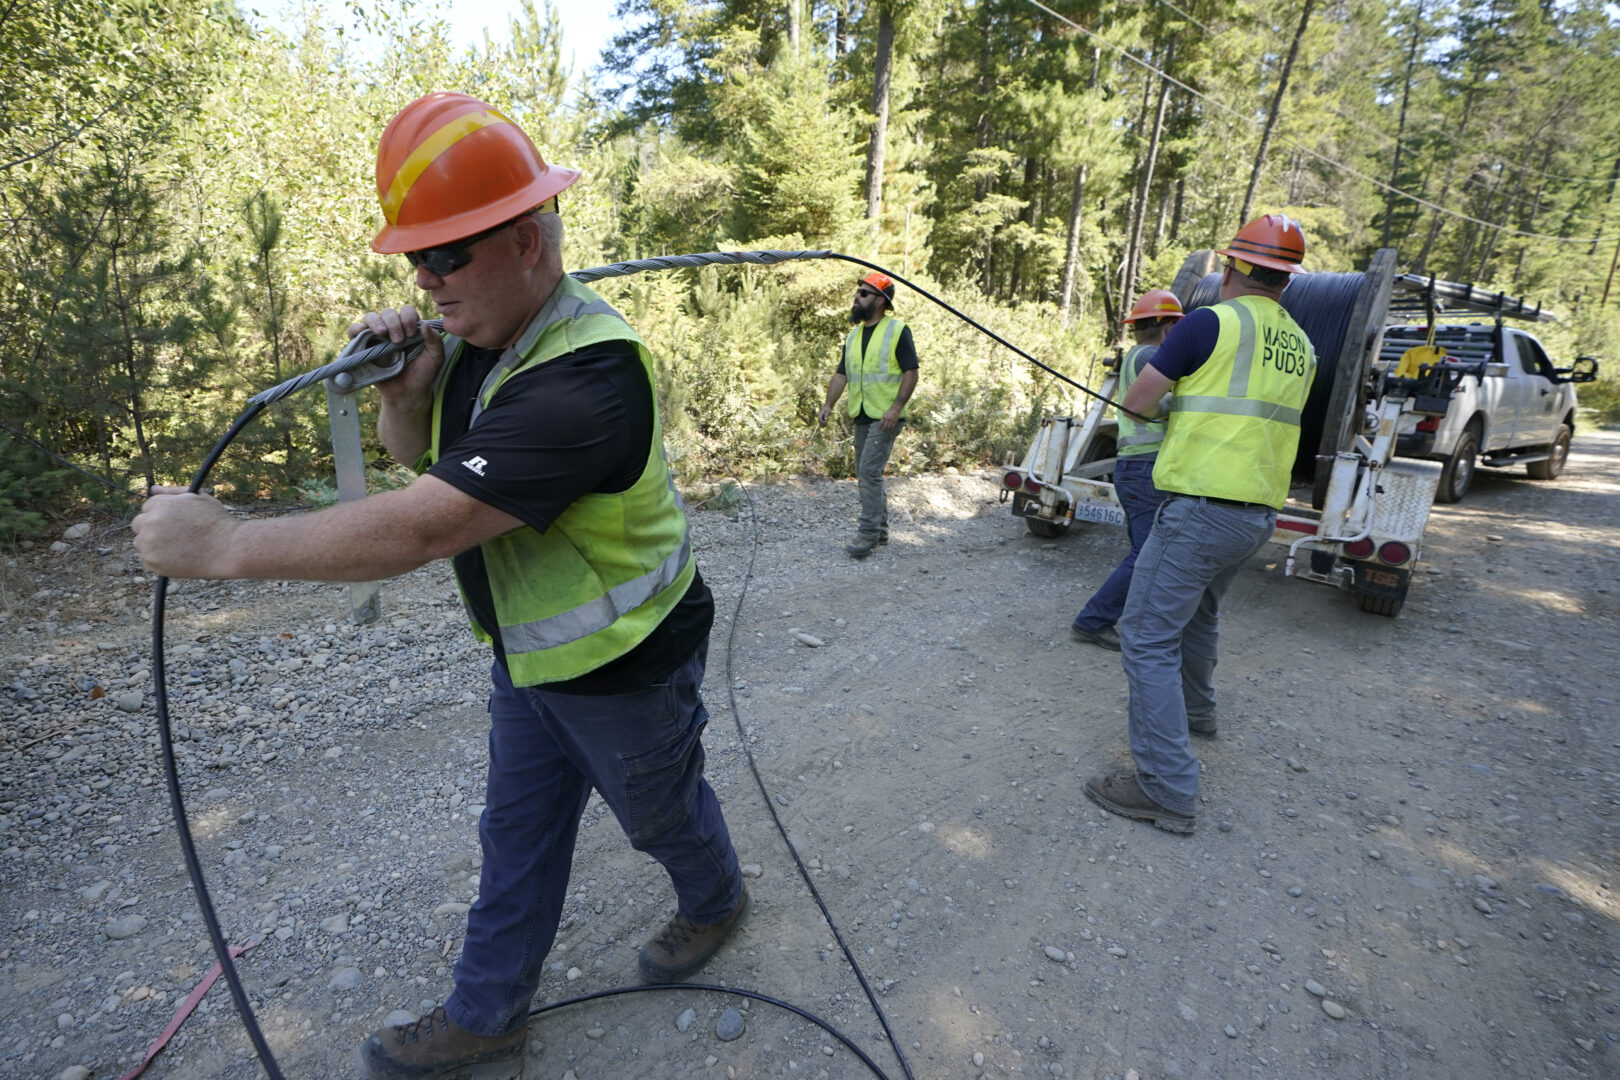 FILE - Carl Roath, left, a worker with the Mason County (Wash.) Public Utility District, pulls fiber optic cable off of a spool, as he works with a team to install broadband internet service to homes in a rural area surrounding Lake Christine near Belfair, Wash., on Aug. 4, 2021. Federal officials announced plans Thursday, July 28, 2022, to spend $401 million in grants and loans to expand the reach and improve the speed of internet for rural residents, tribes and businesses in 11 West and Central U.S. states. 